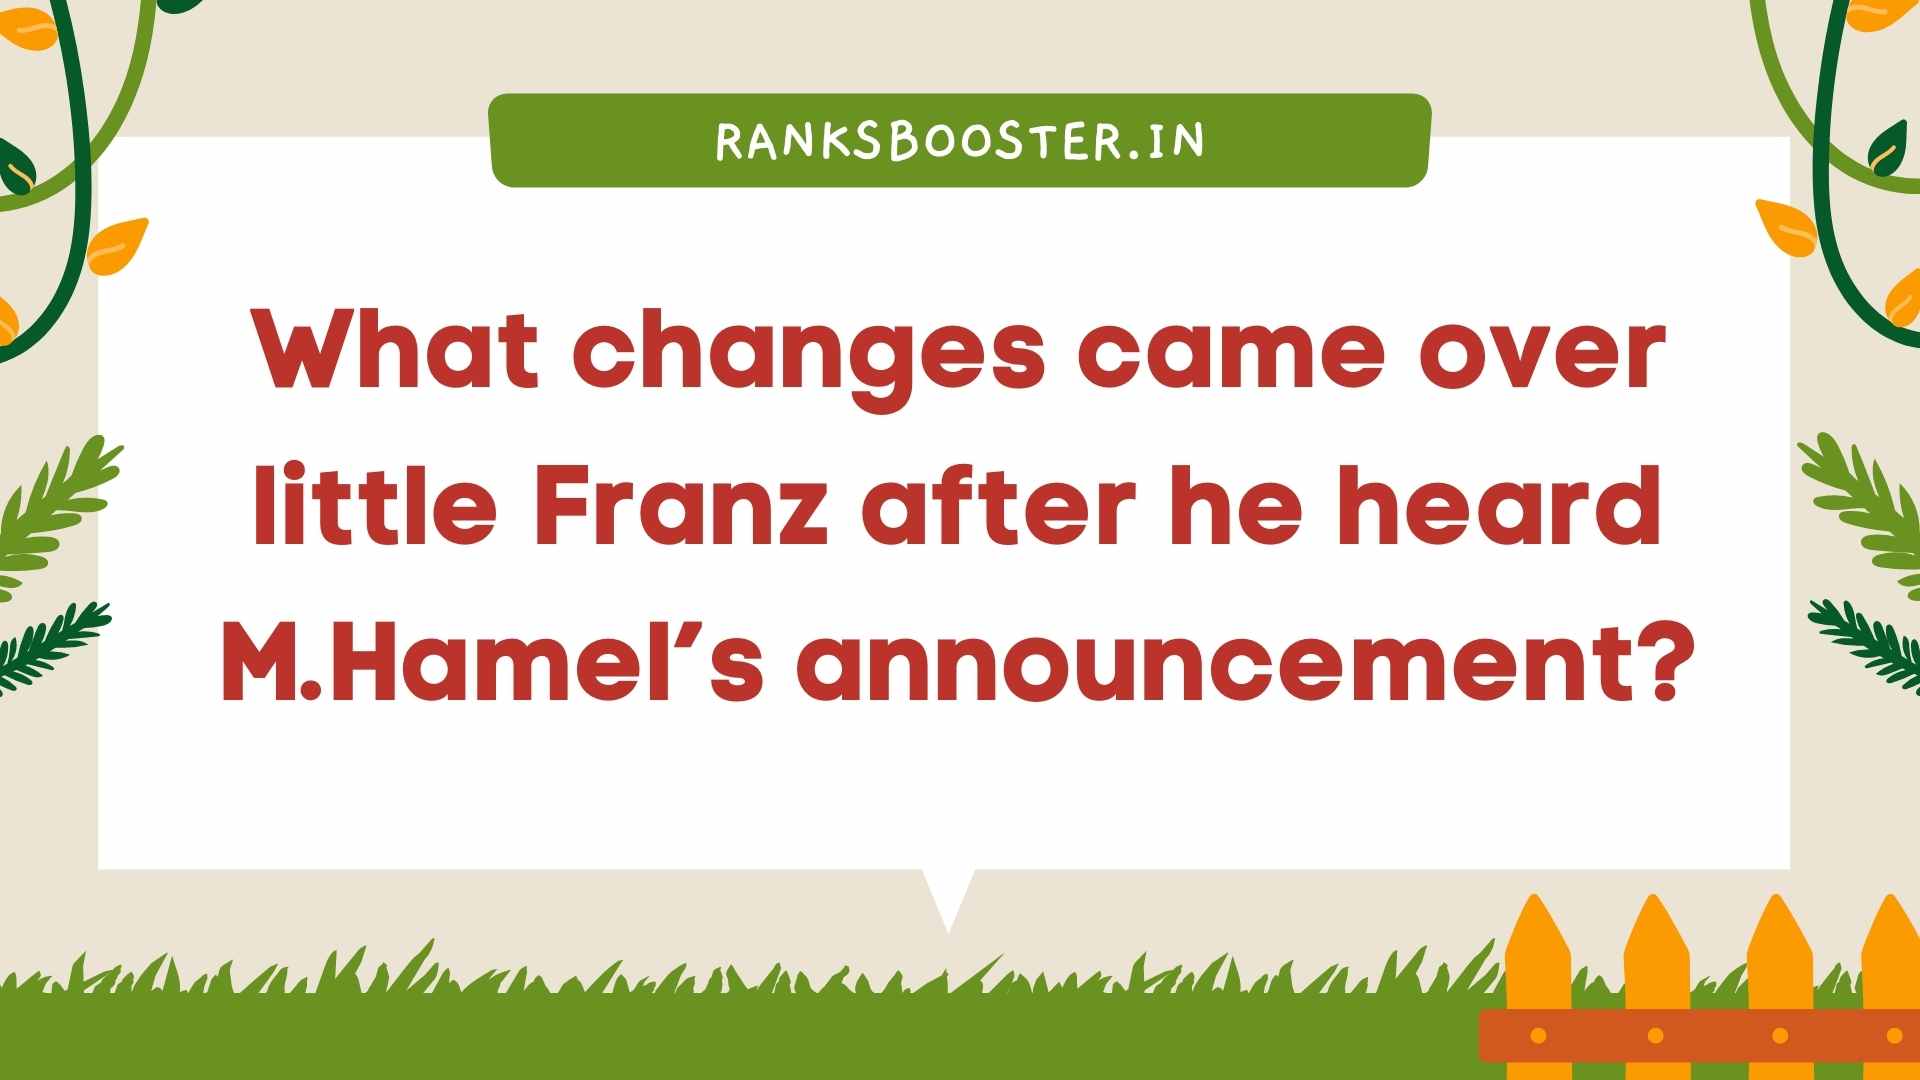 What changes came over little Franz after he heard M.Hamel’s announcement?